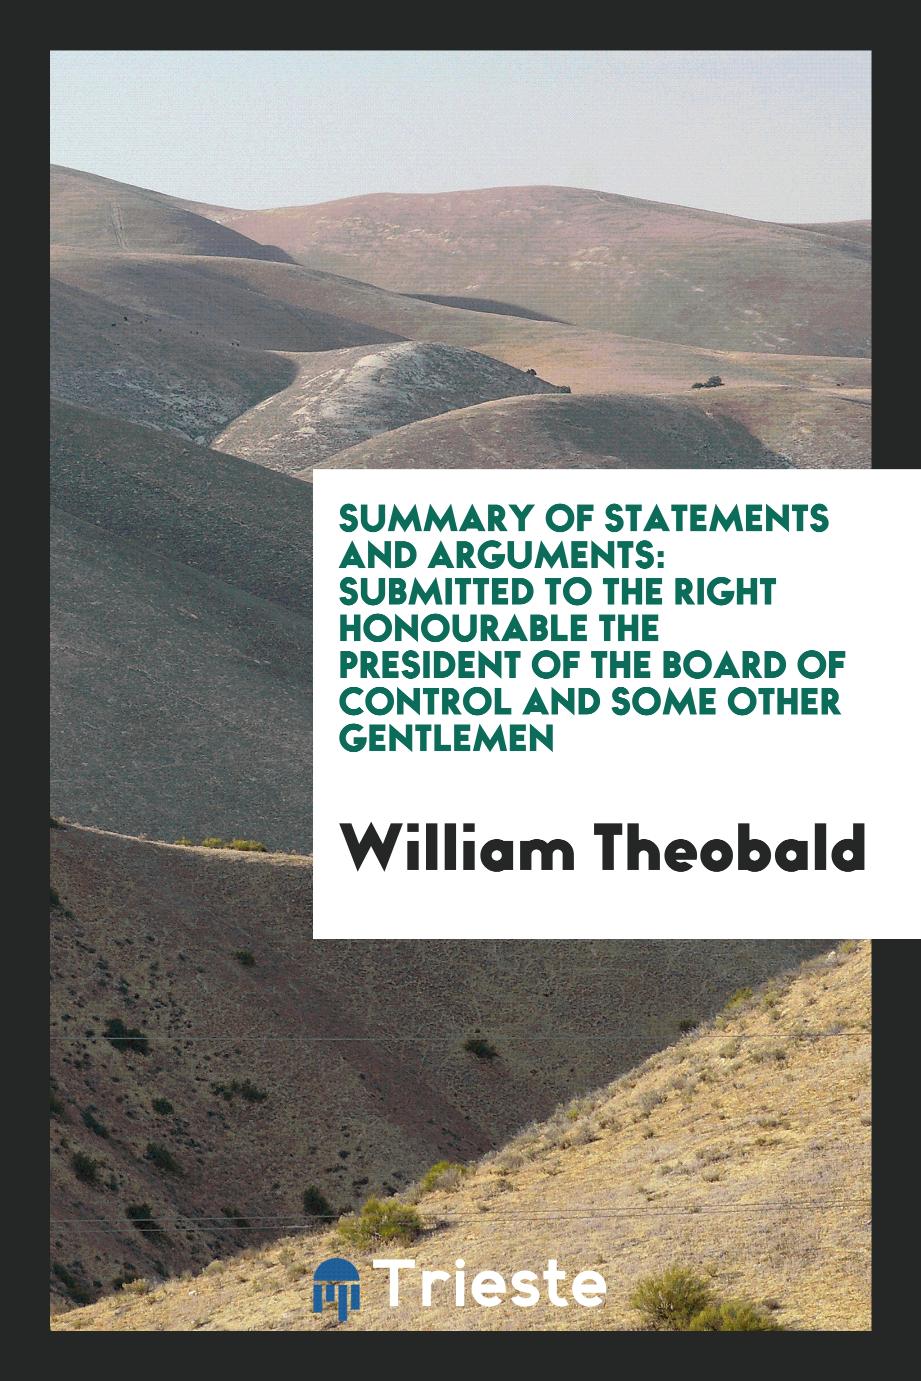 Summary of Statements and Arguments: Submitted to the Right Honourable the President of the Board of Control and Some Other Gentlemen